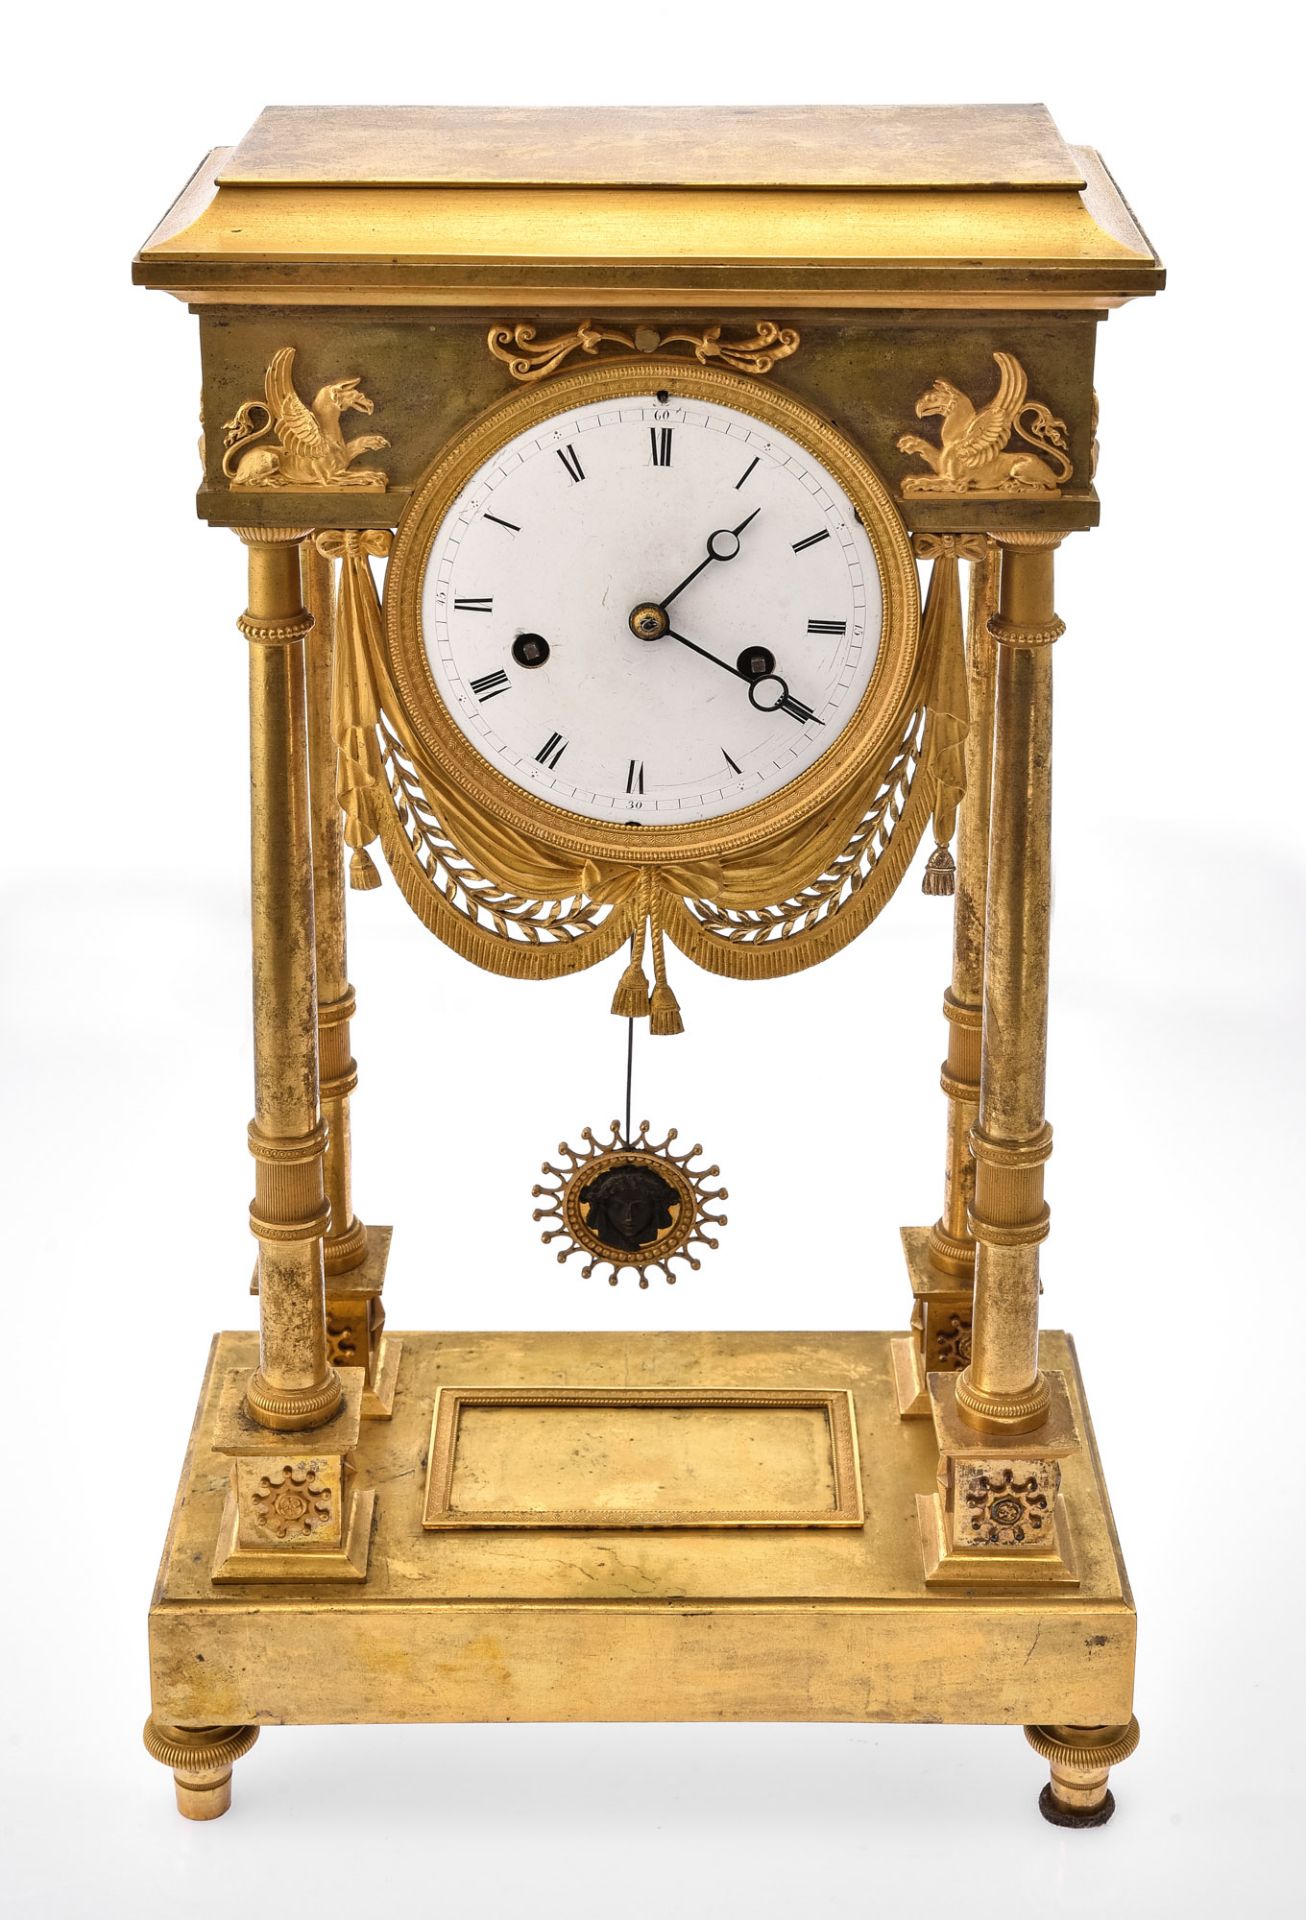 Portal clock, France circa 1820, bronze, fire gilded, decorated with griffin figures in front and o - Image 2 of 8